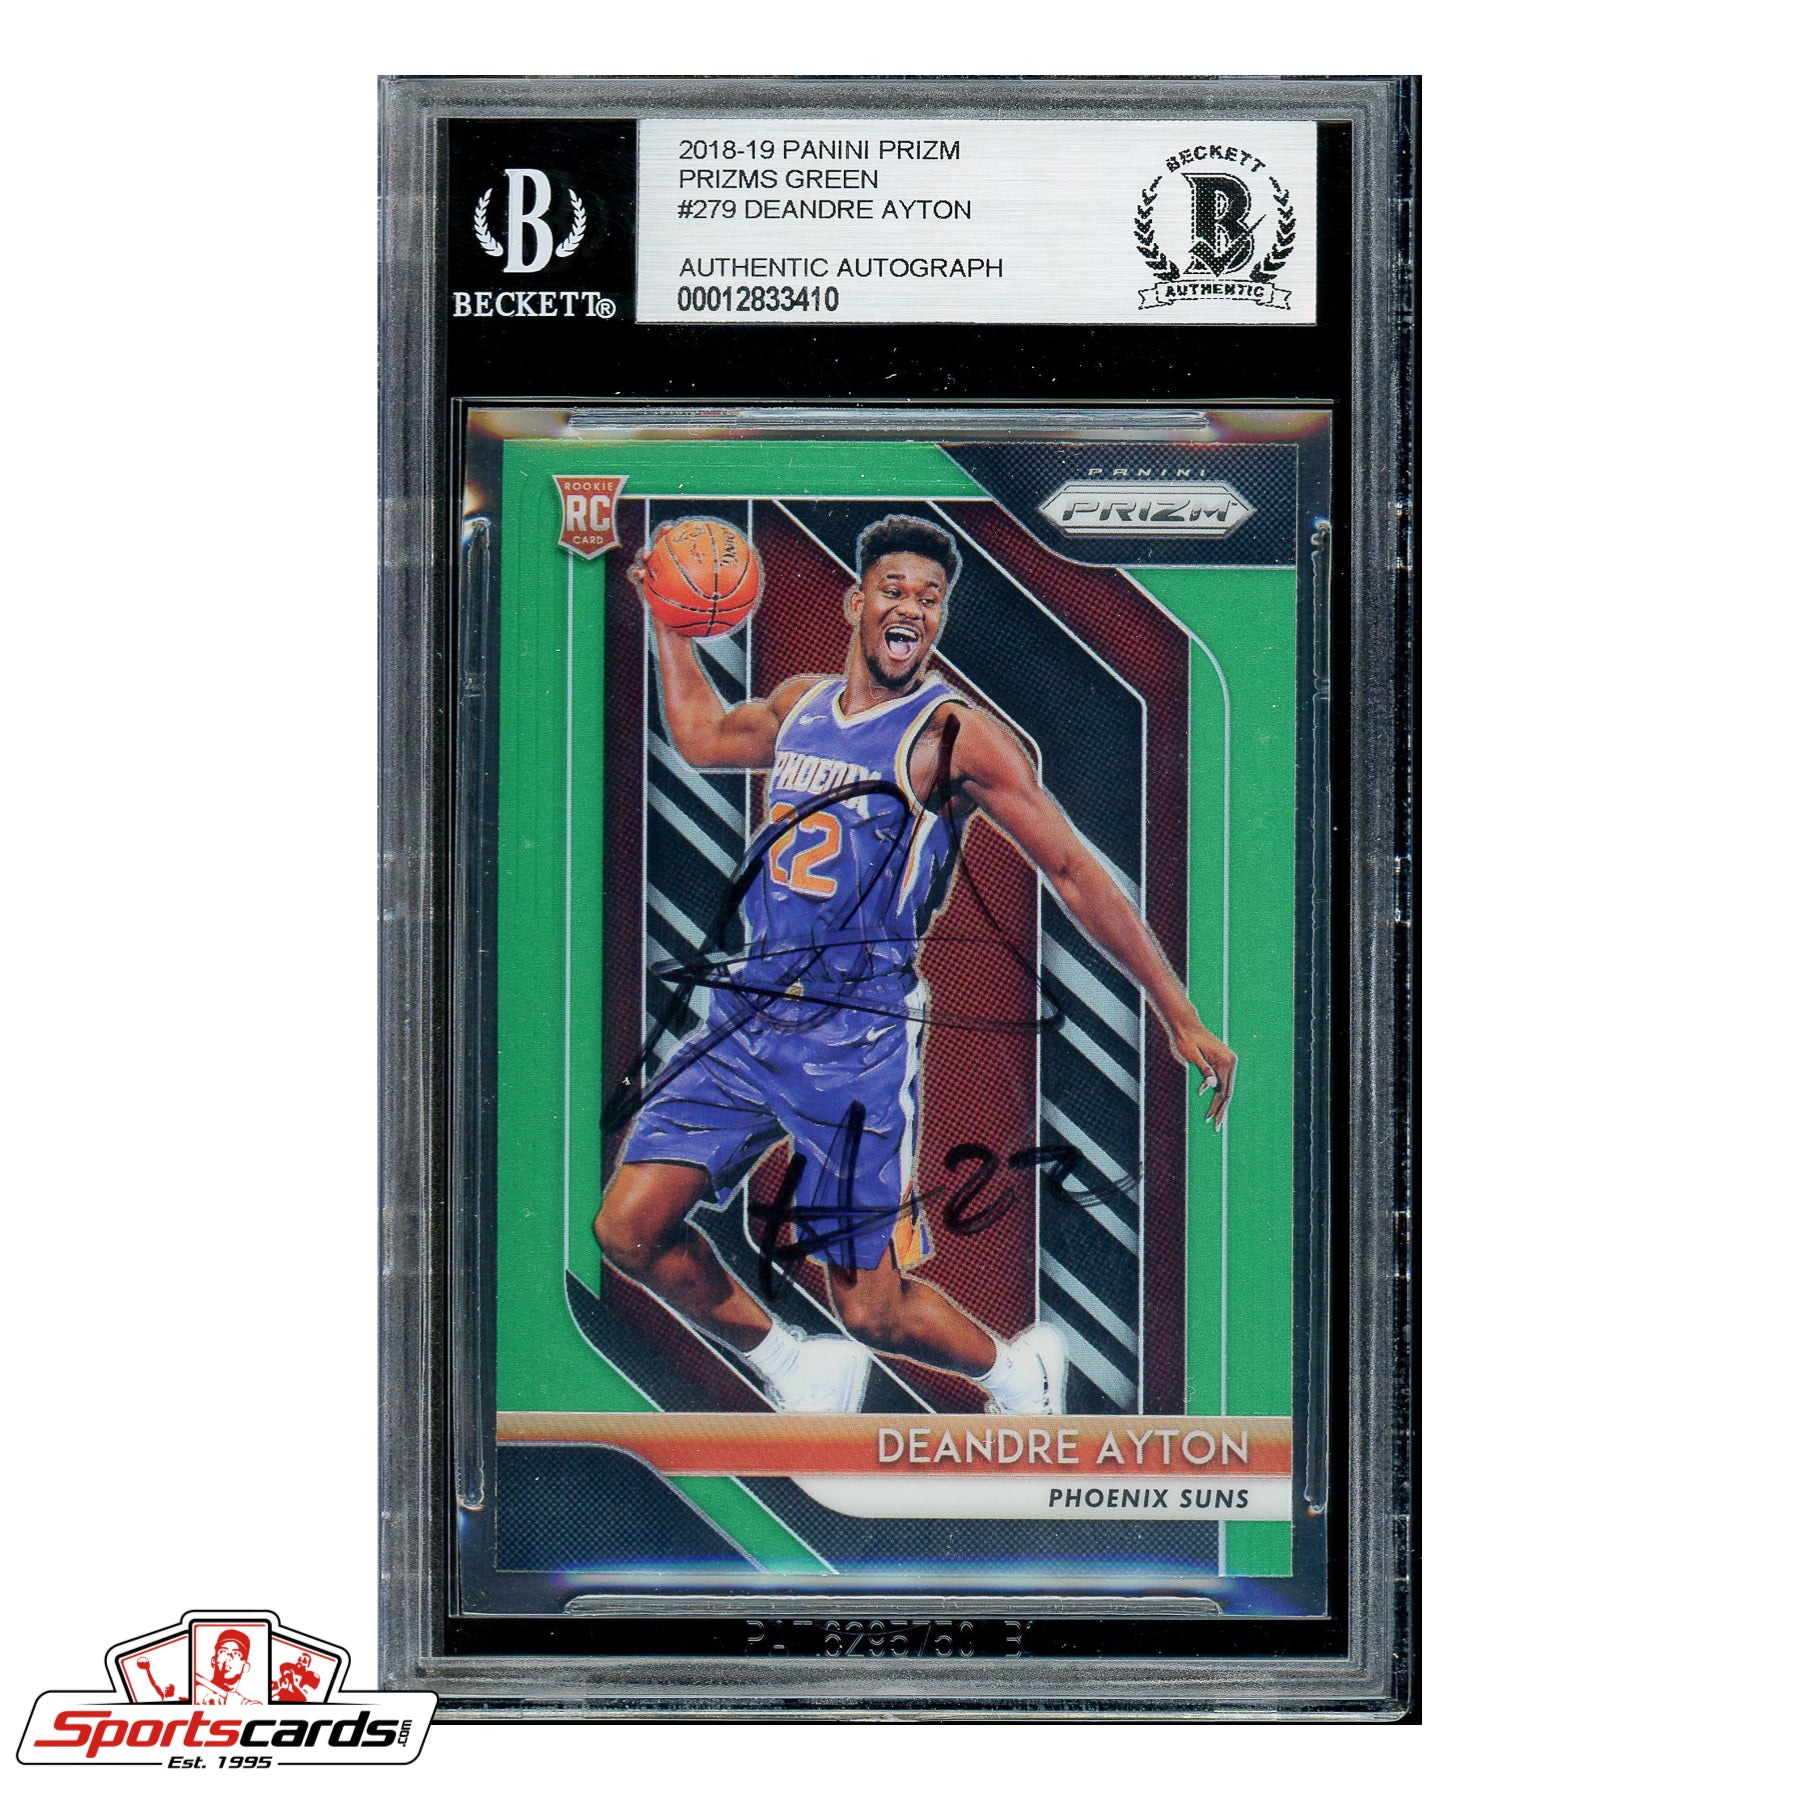 Deandre Ayton Signed Auto 2018-19 Panini Prizm Green #279 RC BAS Rookie Cards Suns